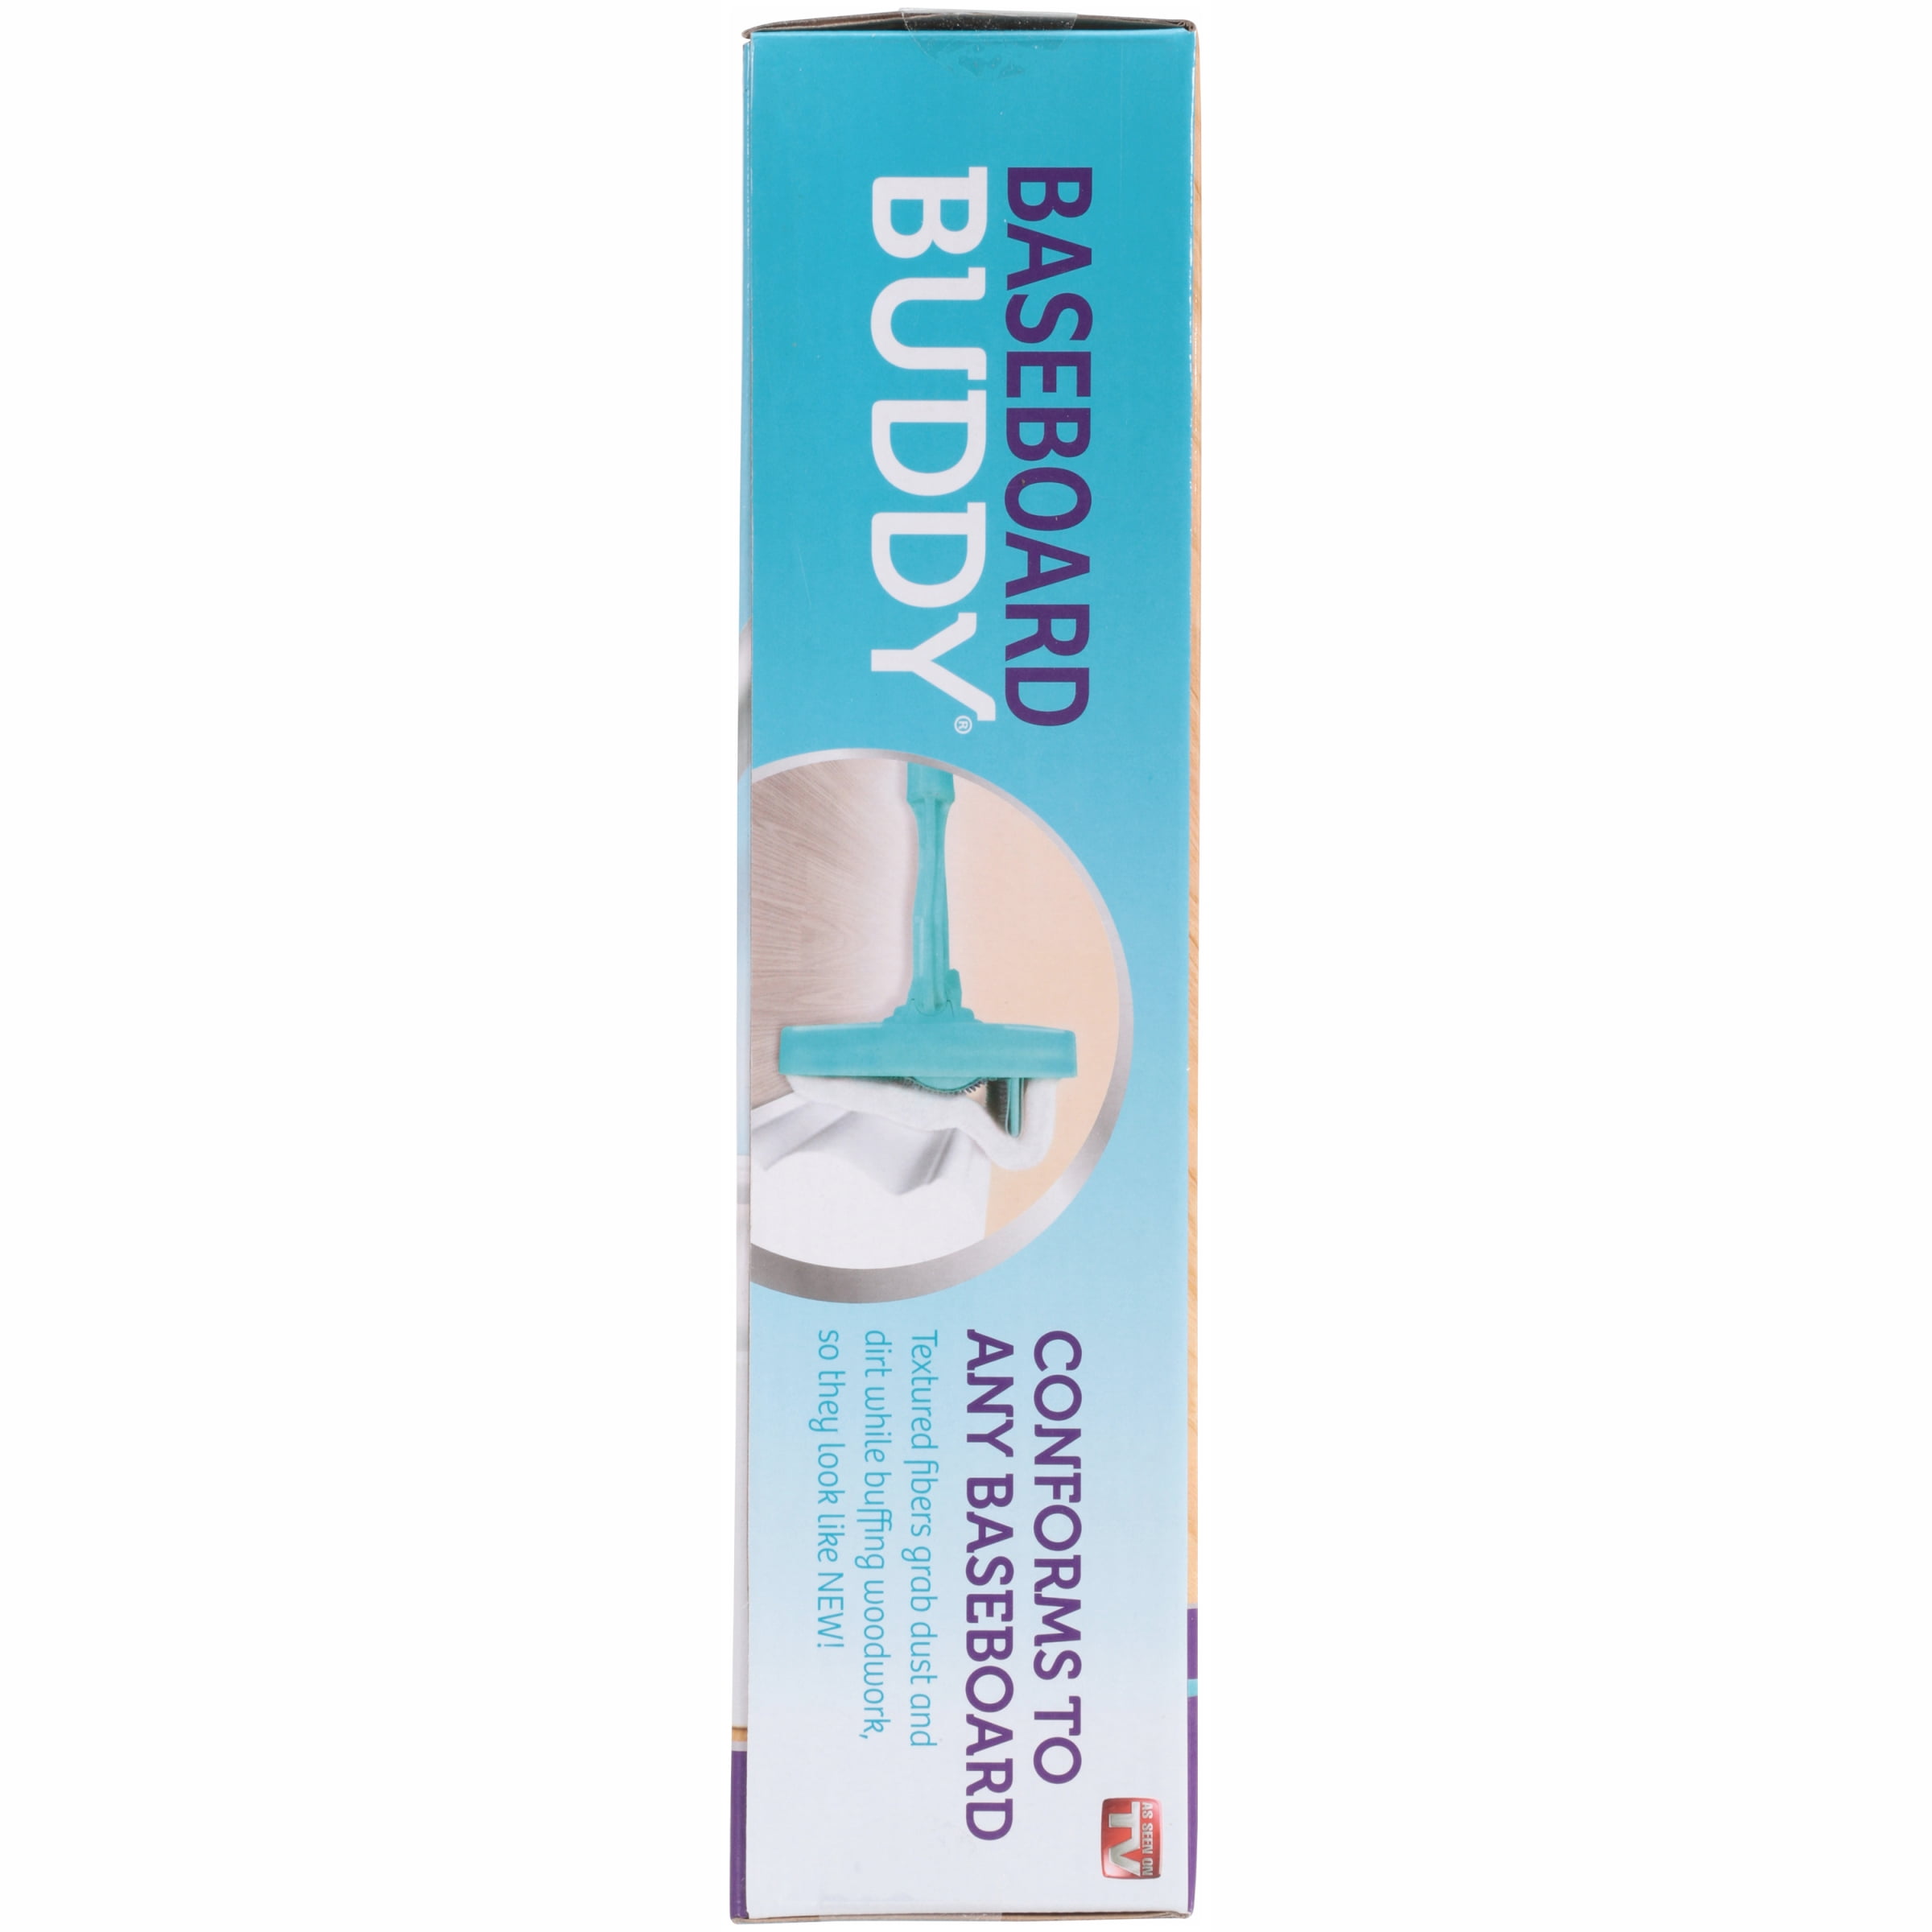 The Baseboard Buddy Is a 'Must-Have,' According to  Shoppers